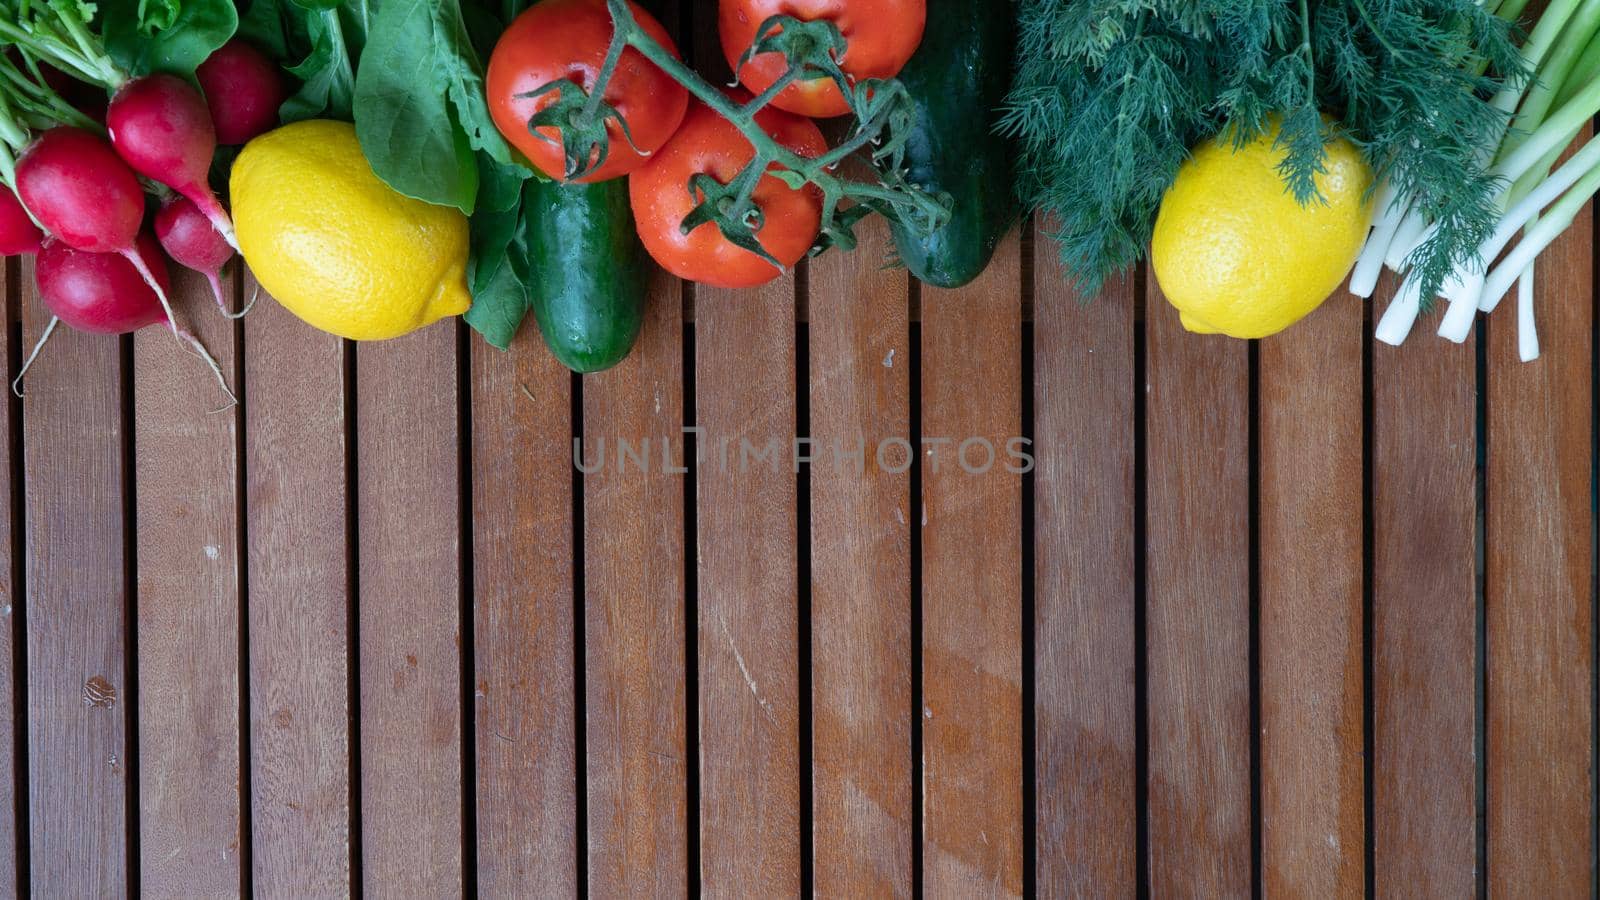 cucumbers, tomatoes, radishes, lemon and dill basil greens and green onions on a flat wooden background by voktybre